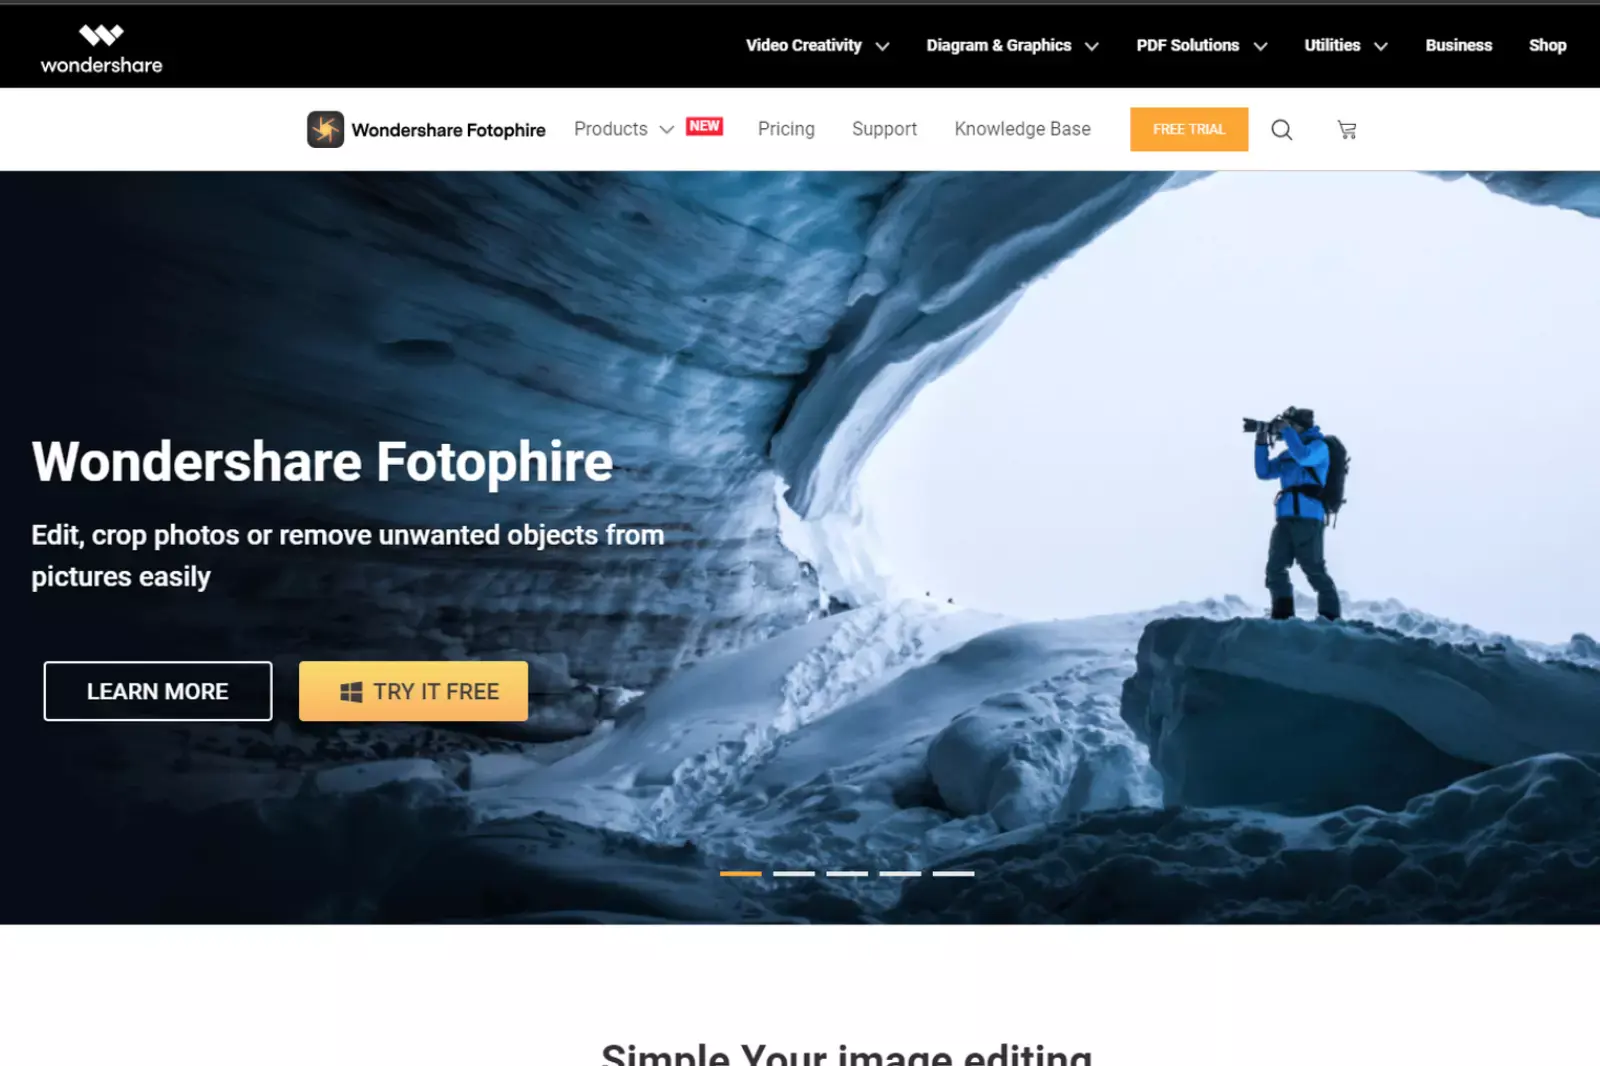 Home Page of Wondershare Fotophire